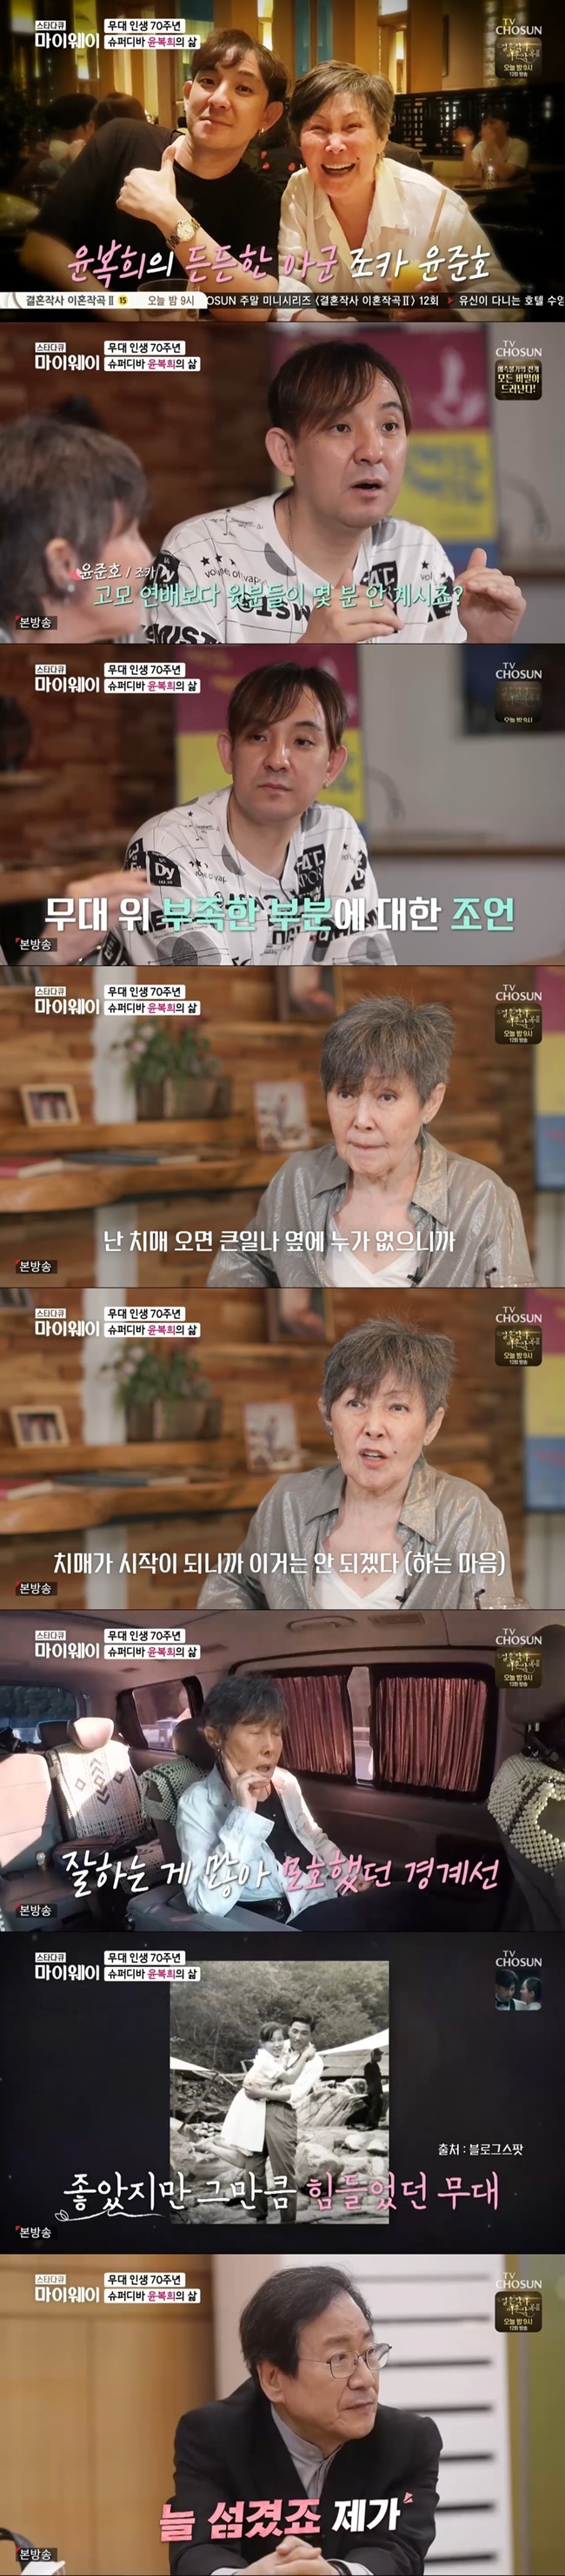 Musical Actor and singer Yoon Bok Hee has expressed his worries about the future.On the TV ship Star Documentary Myway (hereinafter referred to as My Way) broadcast on July 18, Yoon Bok Hee was pictured meeting his nephew Yun June Ho and Actor Im Dong-jin.Yun June Ho has joined together to celebrate the Yoon Bok Hee, which celebrated its 70th anniversary this year.Yun June Ho asked, Now, there are not many people in the Korean entertainment industry than your aunts age, even in the musical side. Yoon Bok Hee said, There is no musical side at all.There are people who are older than me, but there are no seniors. They are all juniors. Yun June Ho said, Are you a scary senior to juniors? I have a professor of acting at my school. He was on stage with my aunt.But he said he was enormous, Yoon Bok Hee replied, Its scary when you teach. Yun June Ho said, I did not get married, but my aunt said that she was not able to see her because she was charismatic.Yoon Bok Hee said: I can hear you in the dressing room after the performance, and you may be the first person the main character has seen, but I point out that you dont know.I know I did well on stage. You dont have to tell me what you know. I point it out and say hello.I am afraid because I point out what I do not know, but I am grateful. Yoon Bok Hee even said something meaningful: Im 70-and-a-half and the most worrying thing is the dementia.I have no one next to me, so it is a big deal for Dementia. My favorite actor Robin Williams also makes extreme choices when Dementia comes.When the dementia begins, I understand that I can not do this. I do not shoot for 10 years because I want to clean it without bothering.I also wear all my clothes for a few decades and give them everything that juniors will like. I did it (cleaning up).One of the things Im doing is a concert, and I want to show you (my) whether I do it once a year or twice.I want to sing Yun June Ho. I have a song for a while and put it on a CD.Yoon Bok Hee said: Im not a singer, I wanted to come down from the stage quickly, I started because I liked it, but Mother, my father died and had to feed my brother, so I worked.I wanted to come down the stage because it was work for me, and I did not think I was good. I felt that I was not so good when I was doing Paddam Paddam, Peter Pan and Superstar.Yoon Bok Hee met Lim Dong-jin in the musical Paddam Paddam Paddam; Lim Dong-jin said, It was a glory; at the time, Yoon Bok Hee was an idol of all people.When I became a couple, I was not a famous actor. I always served. We played a lot.How many actors do you know just how much you act for a lifetime? 